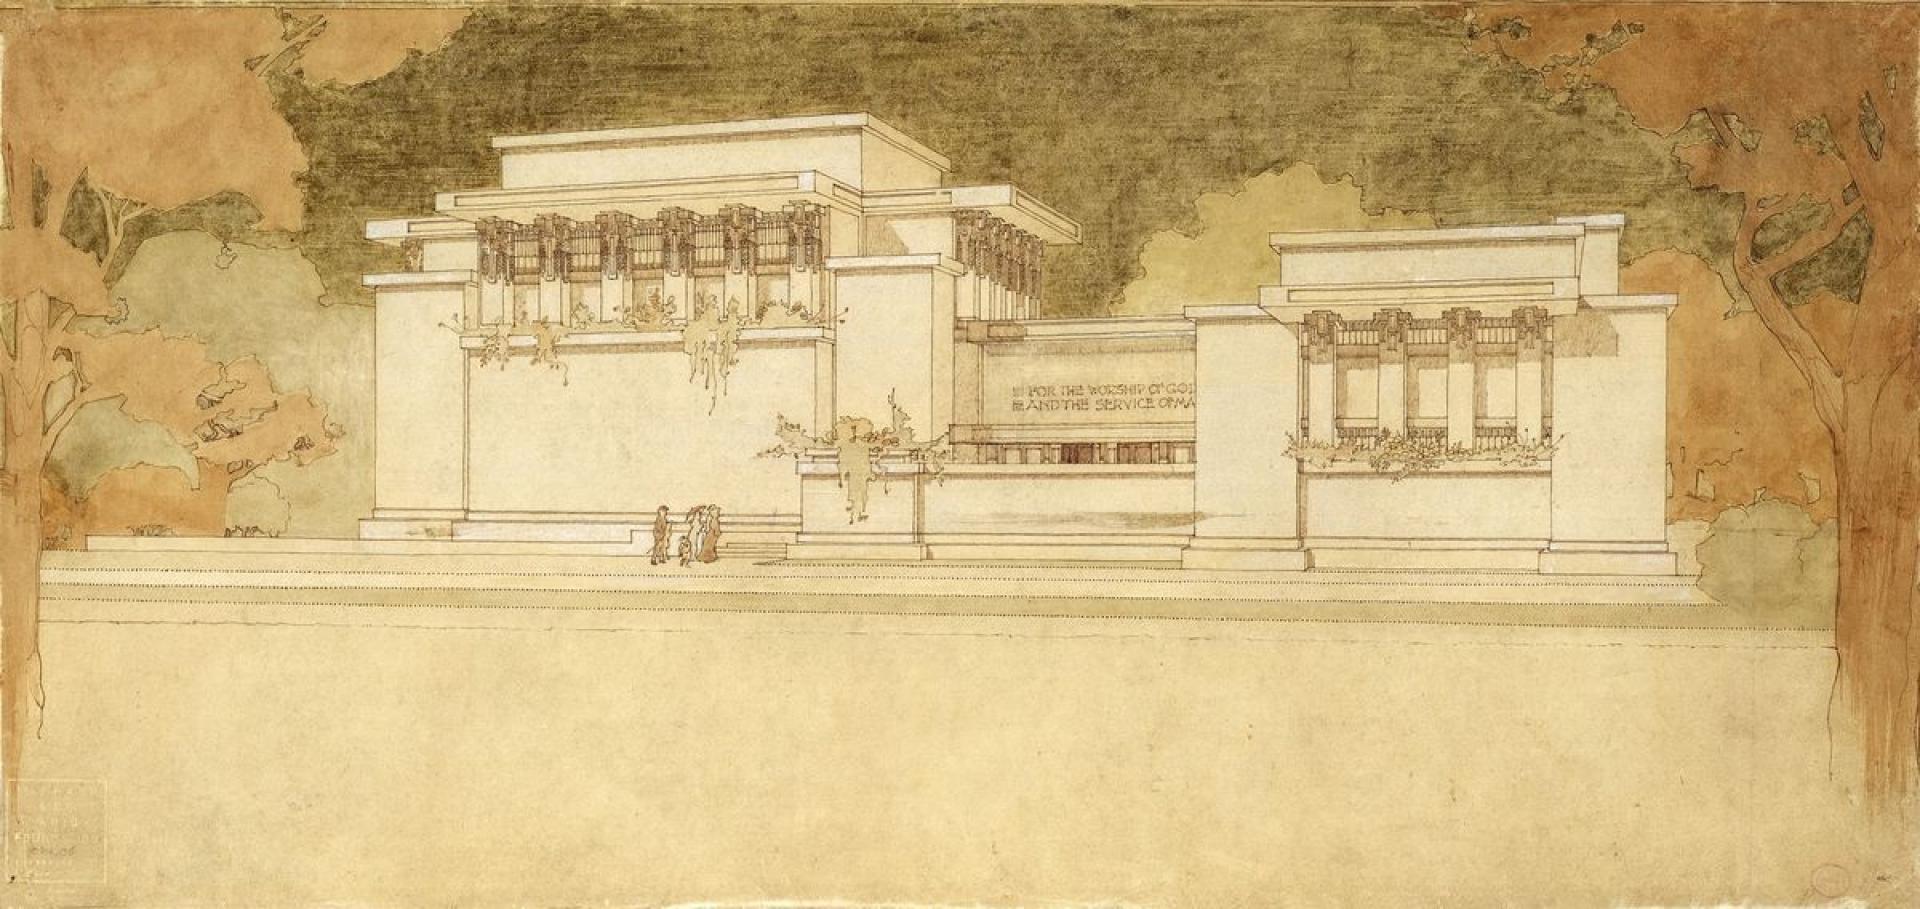 Unity Temple, 1905, Oak Park, Illinois. Watercolor and ink rendering by Marion Mahony Griffin. | Photo via Curbed